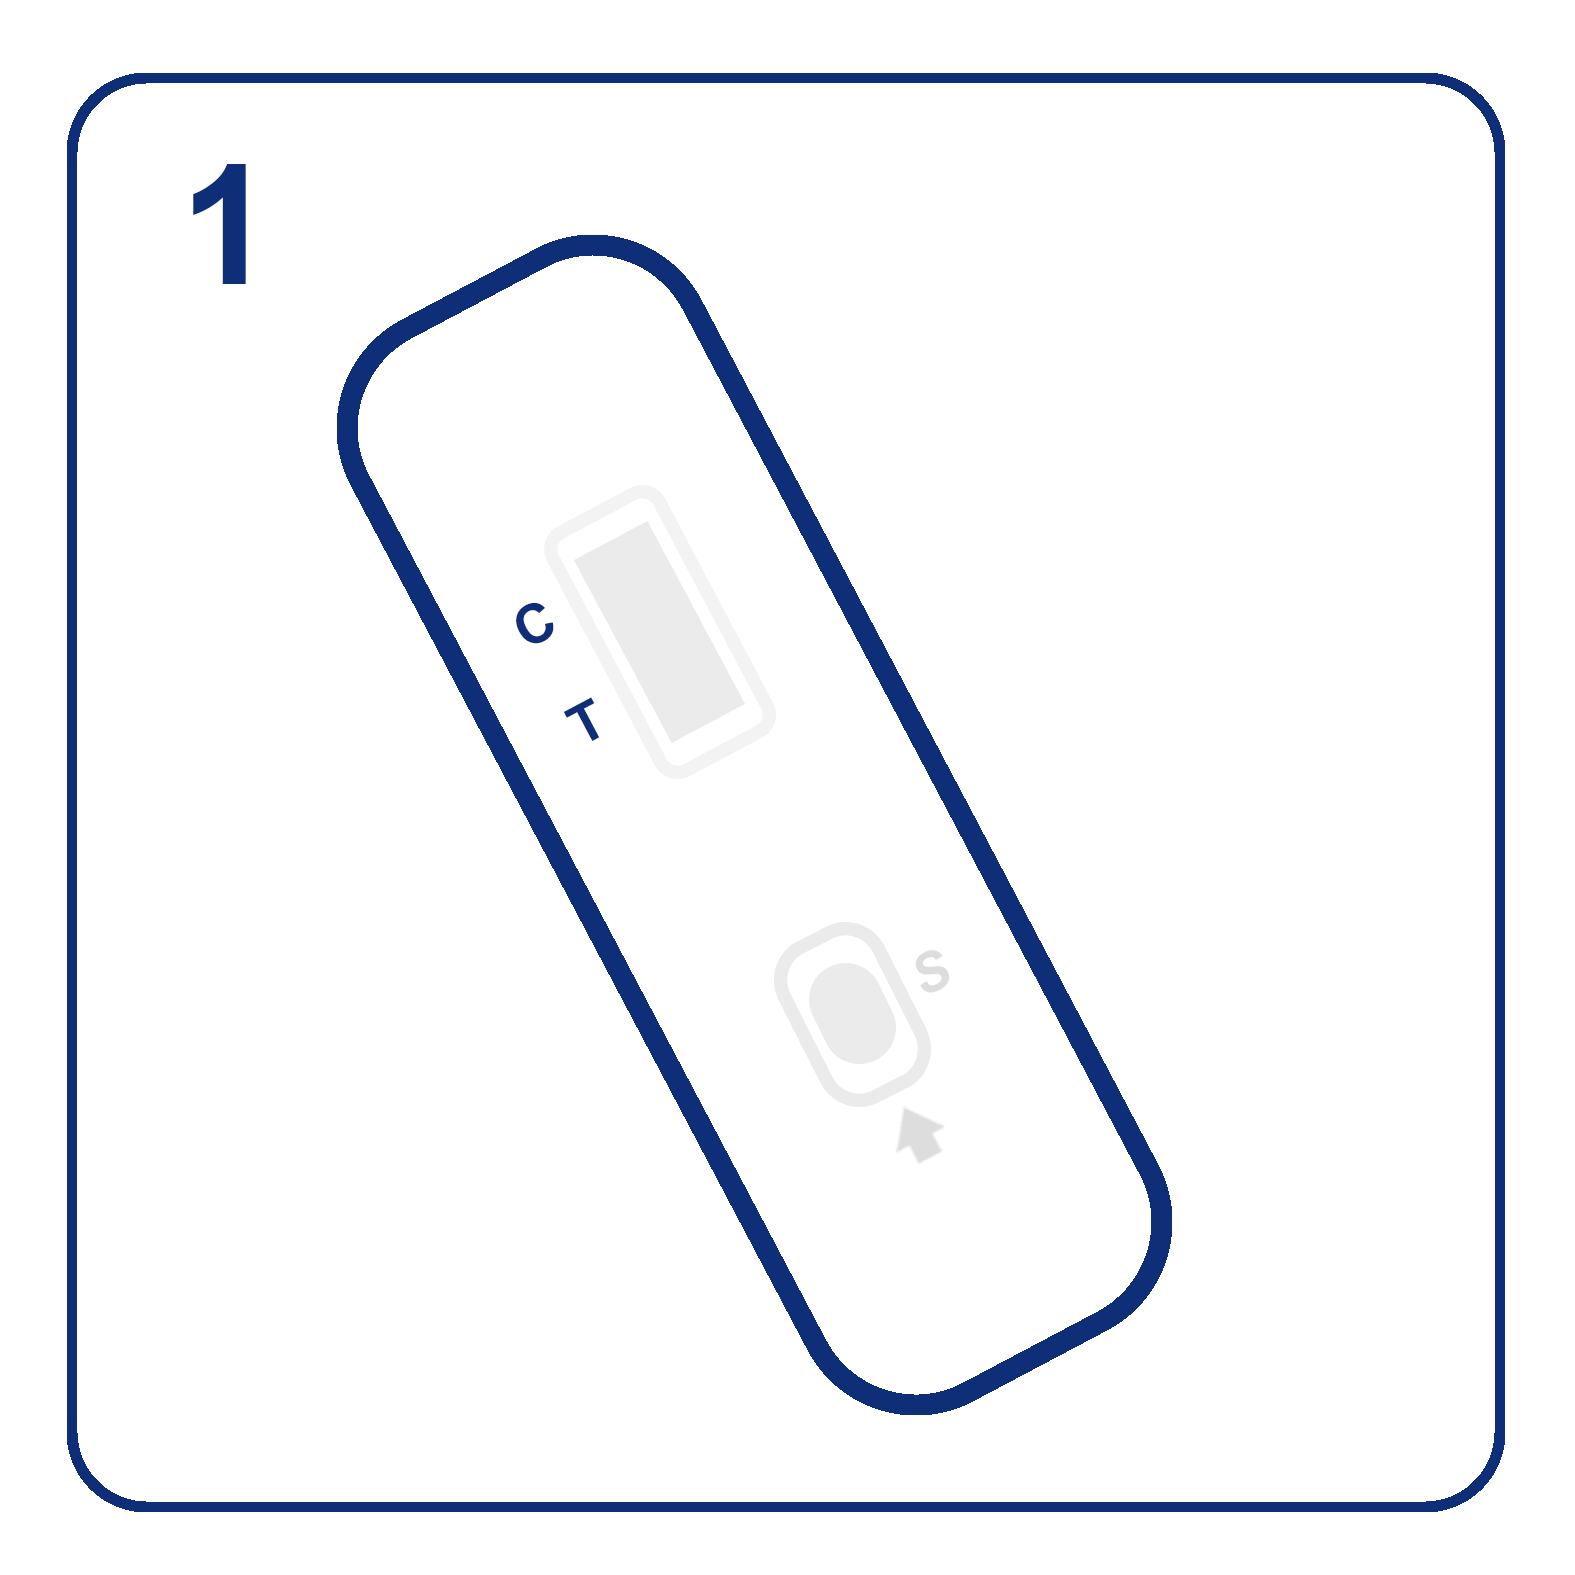 Place the cassette on a level surface at room temperature (15-25°C, 59-77°F).